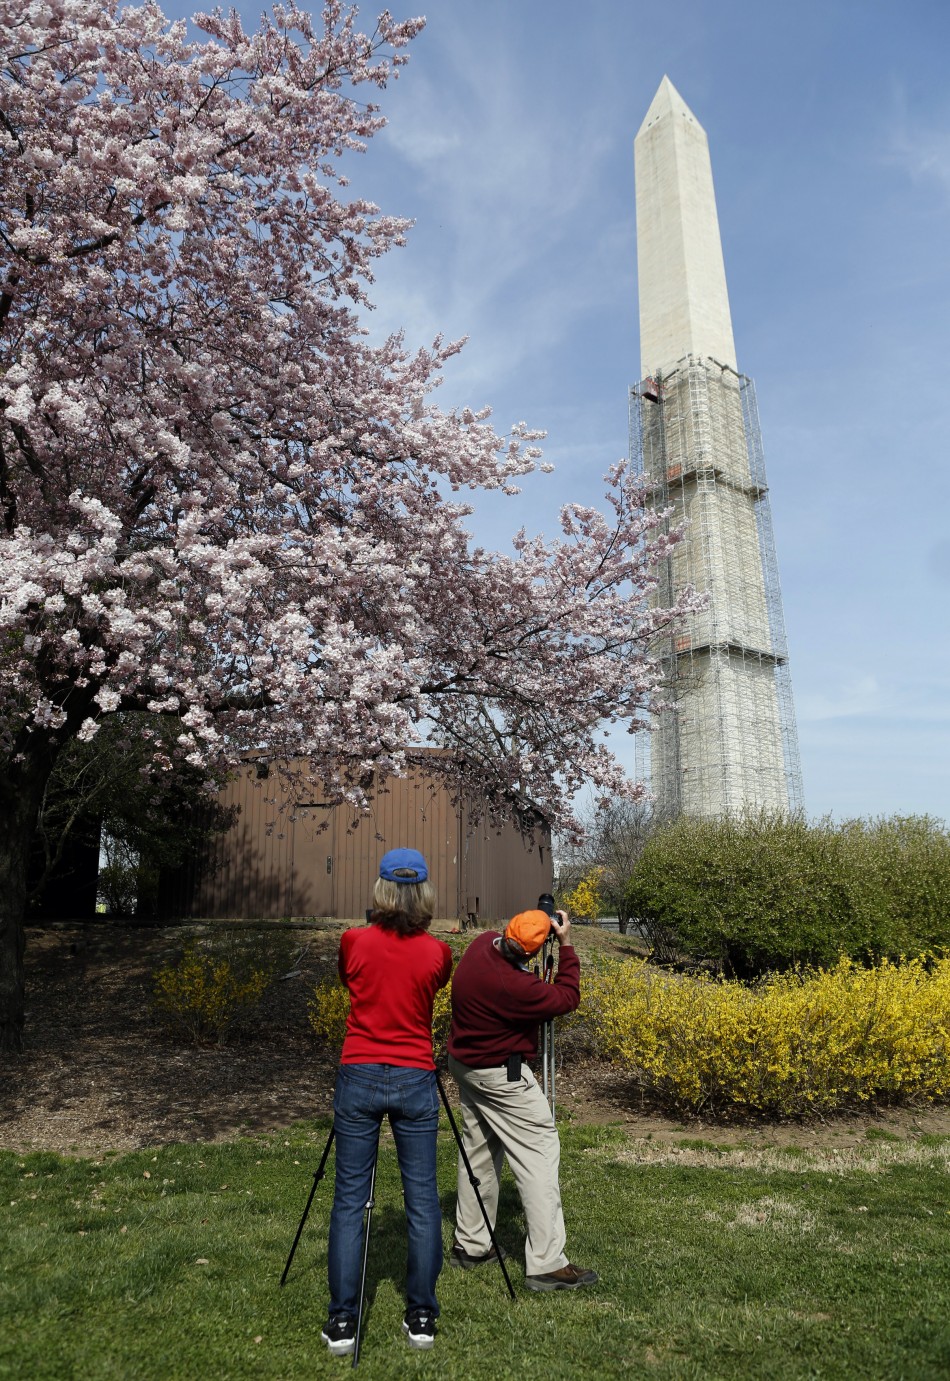 A couple photograph cherry trees in front of the Washington Monument in Washington April 8, 2013. The National Cherry Blossom Festival is in full swing, with peak bloom occurring early this week.